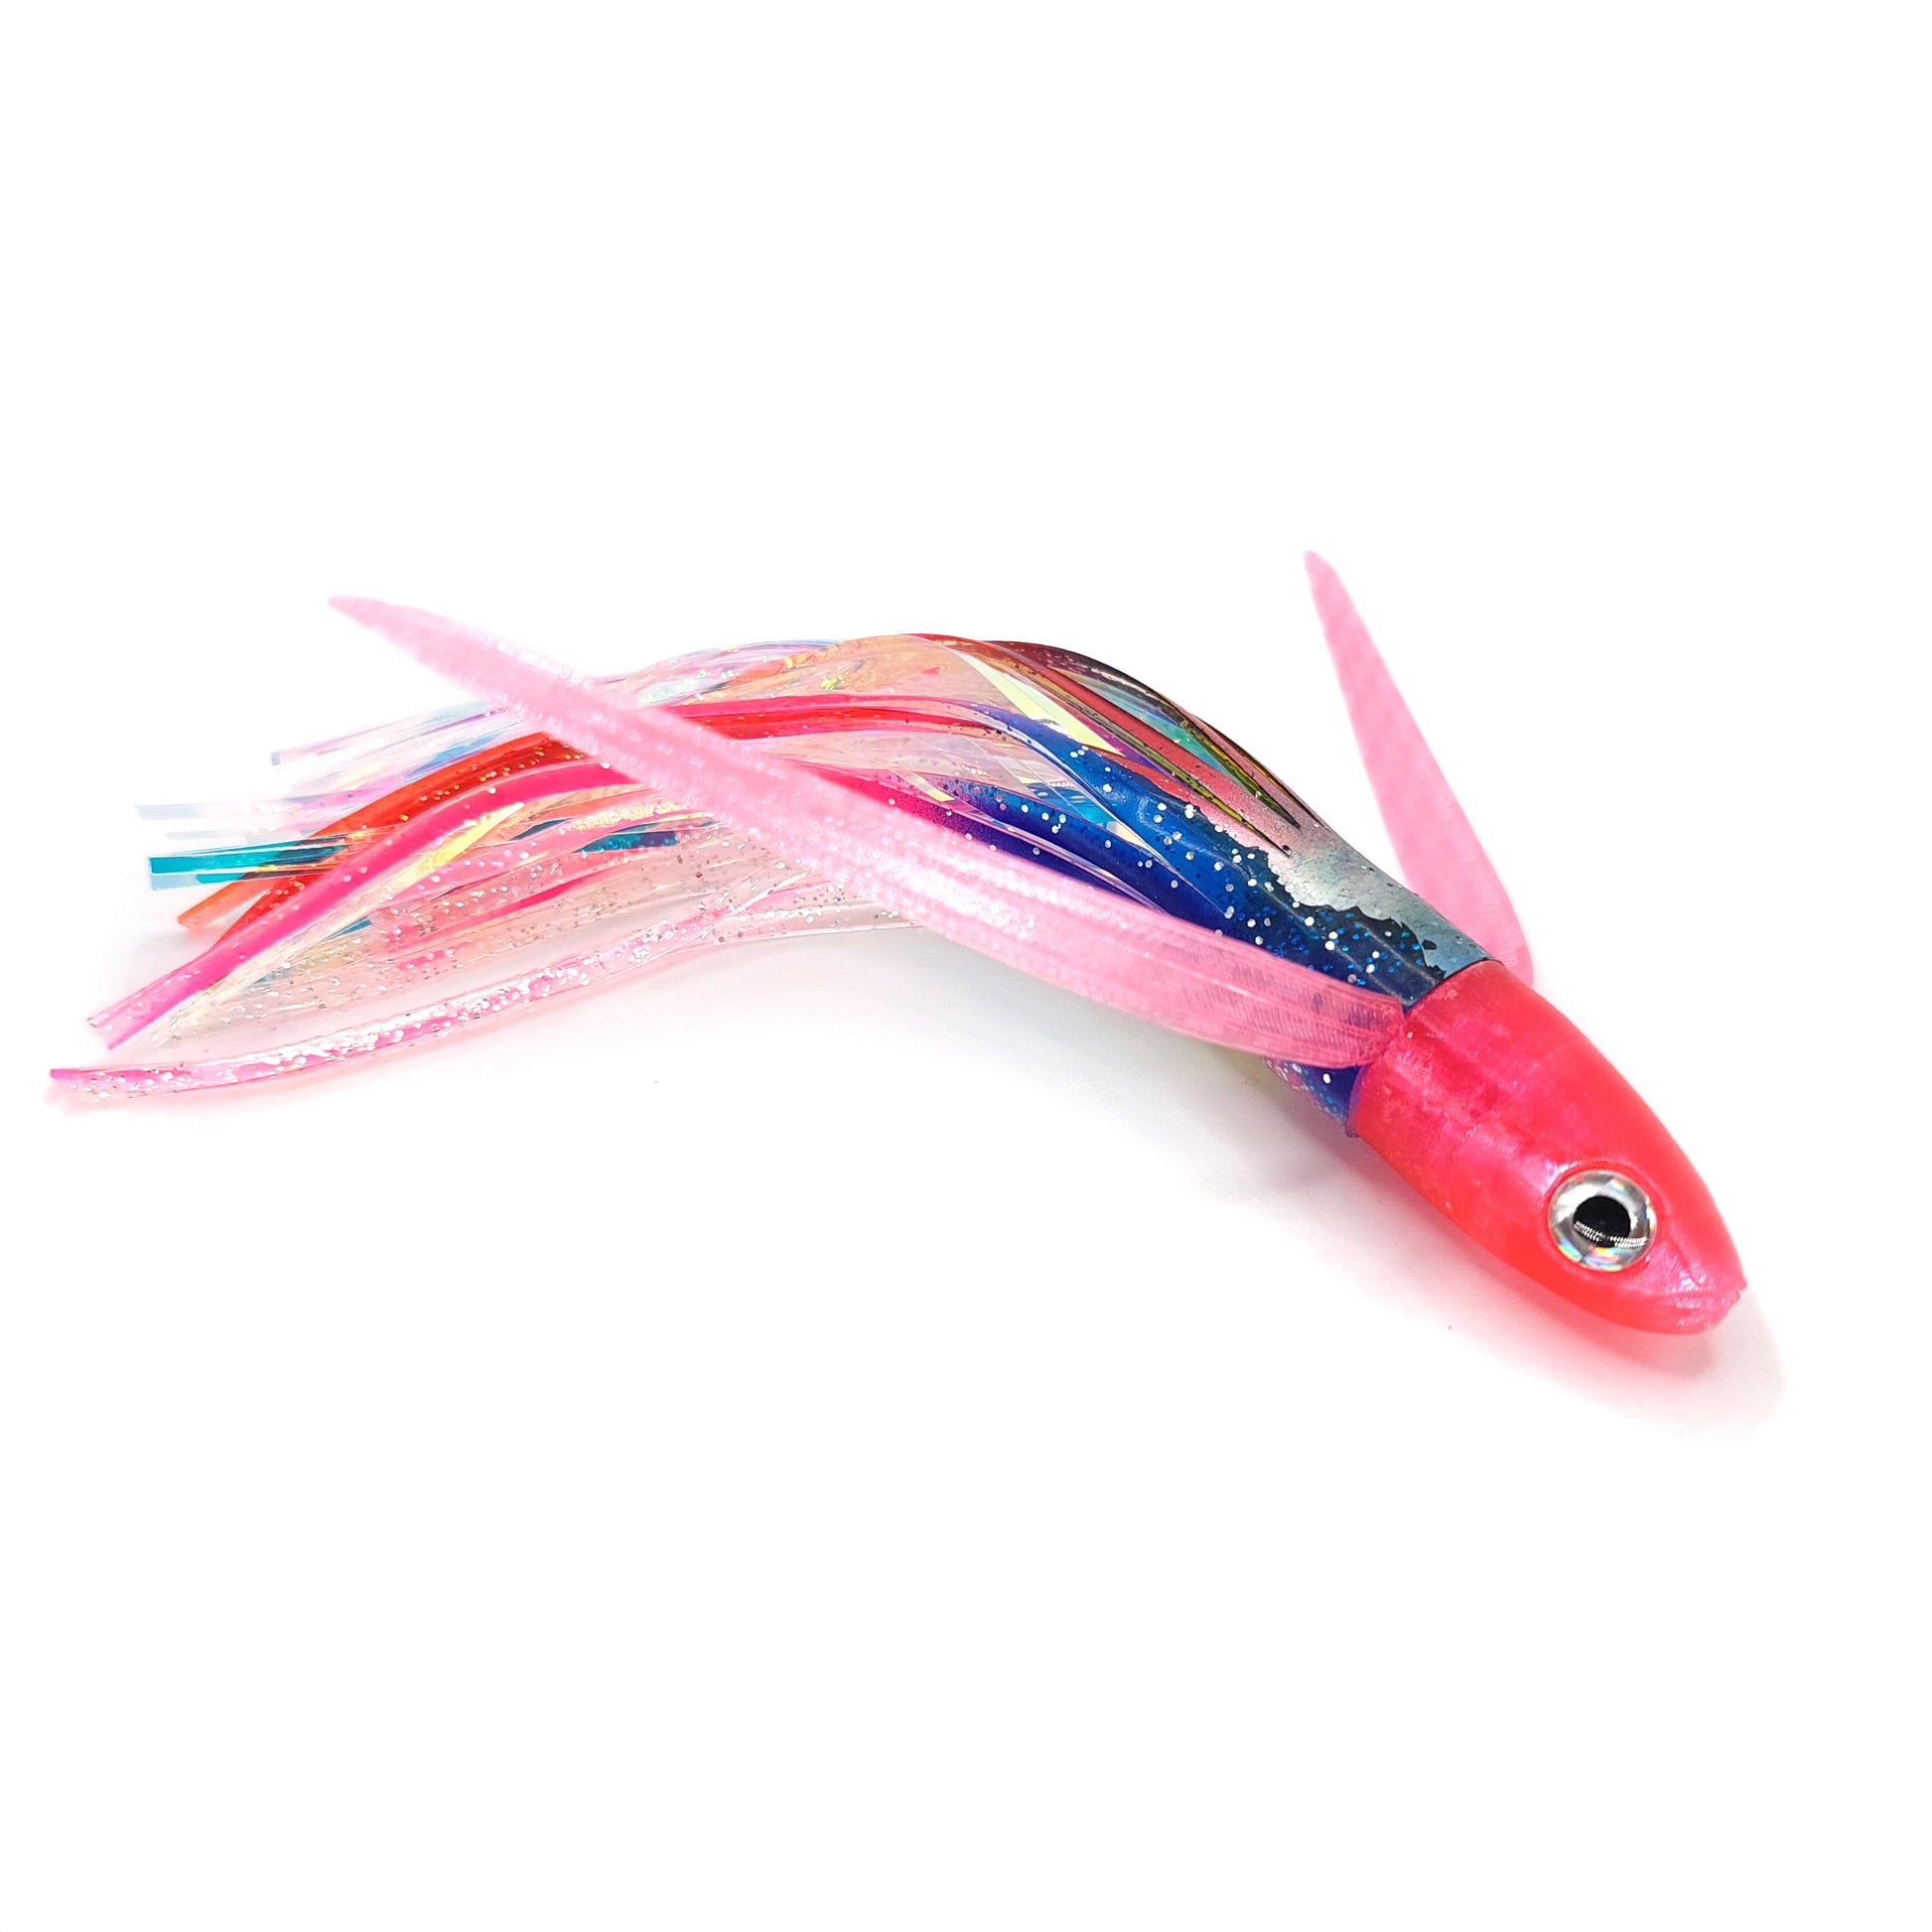 Williamson Lures Live Softie Bird Ballyhoo Combo All colors available